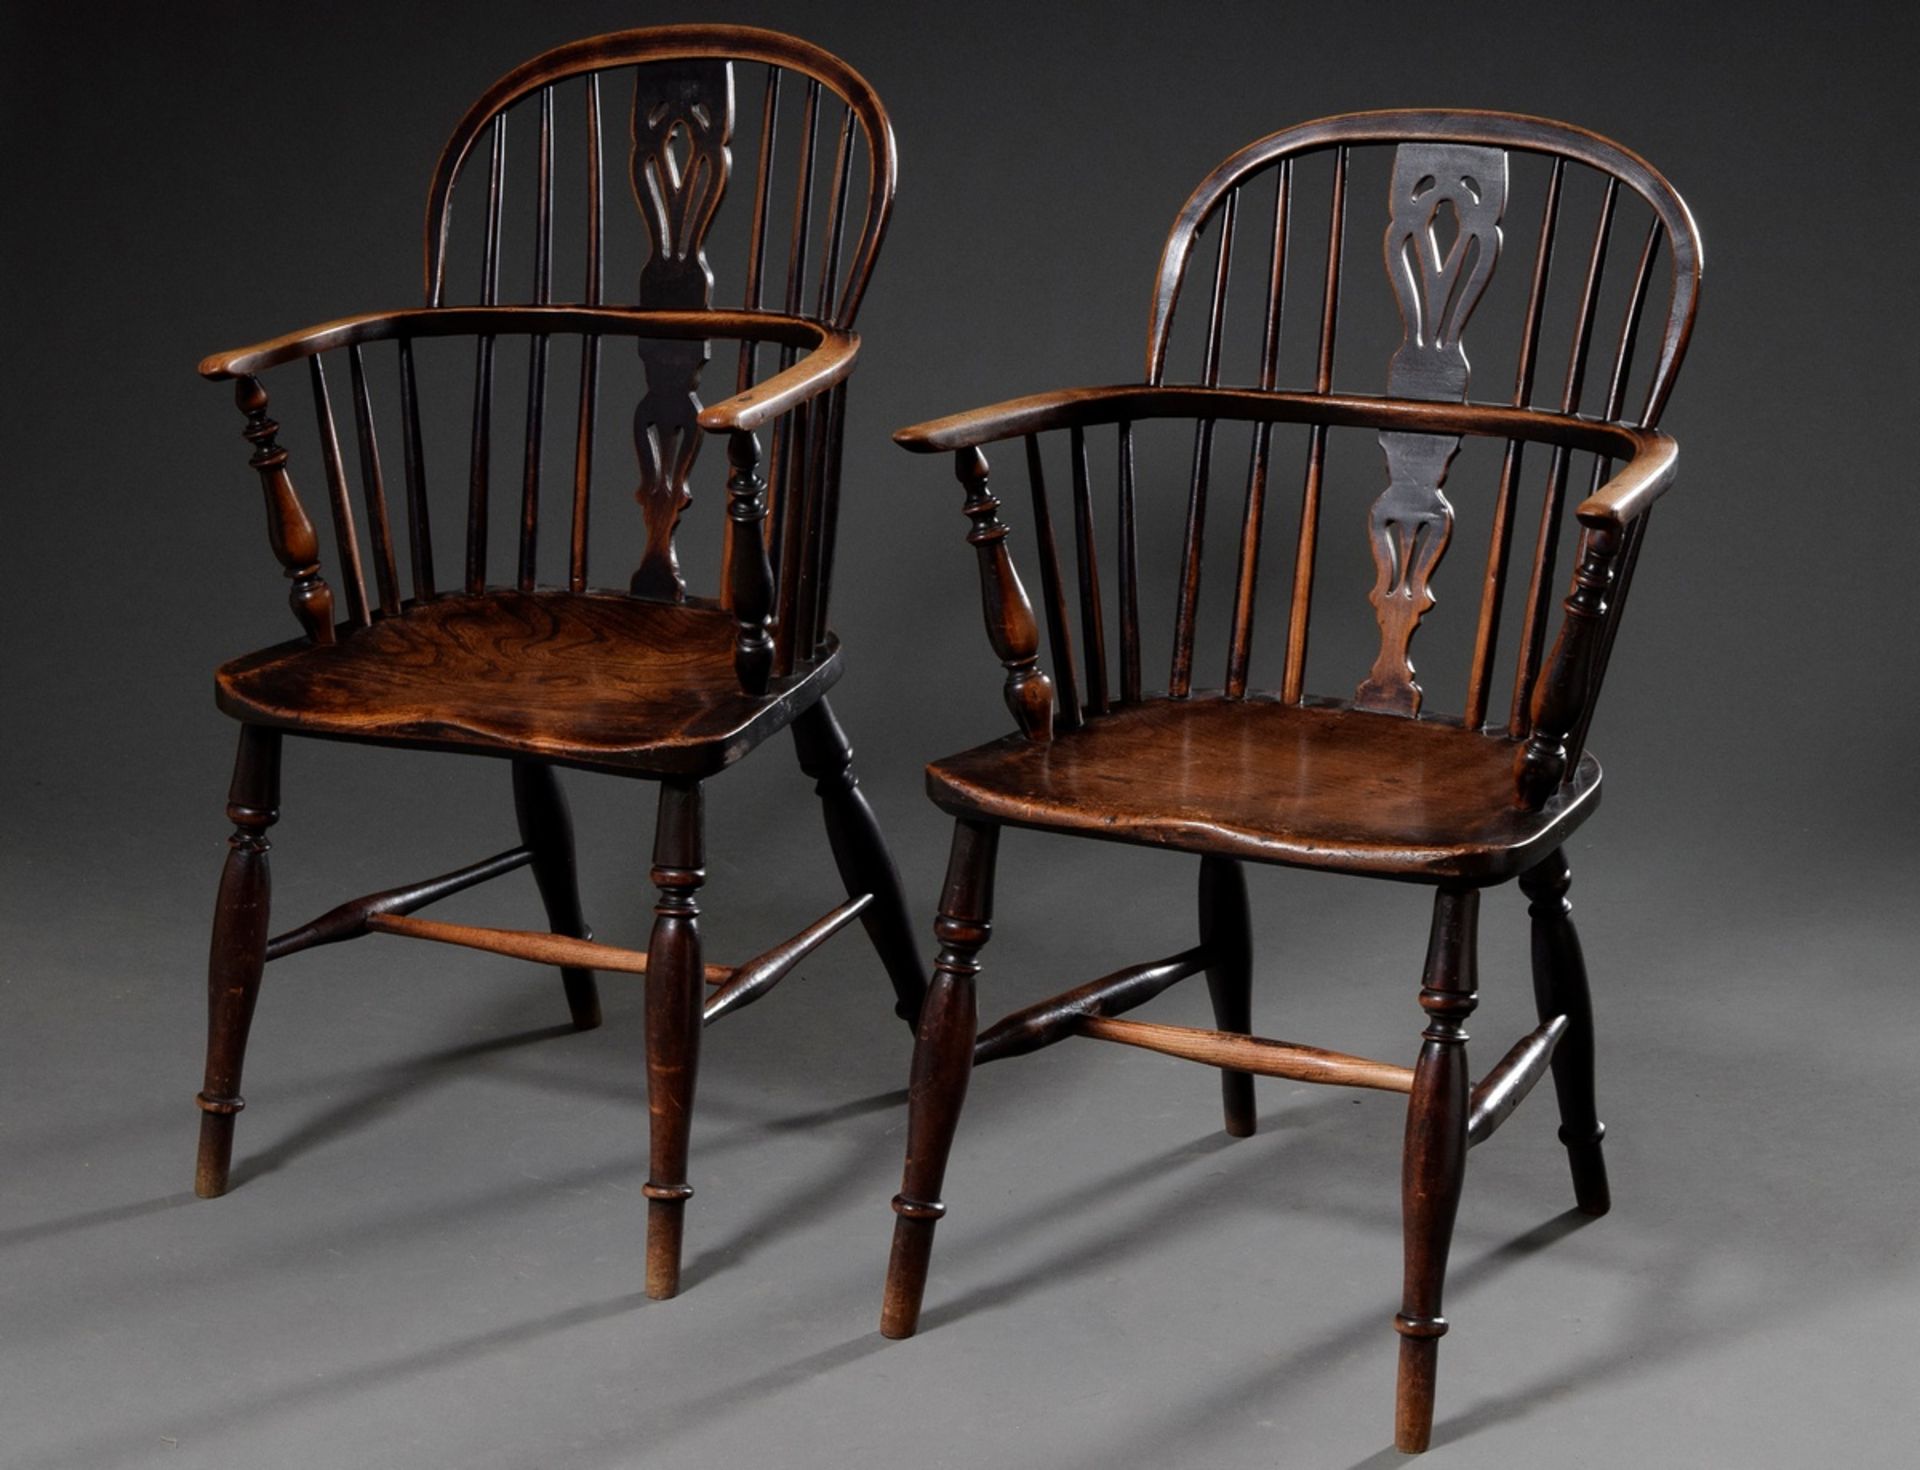 Pair of Windsor Chairs, elm stained, h. 45/89 u. 92, signs of age and use